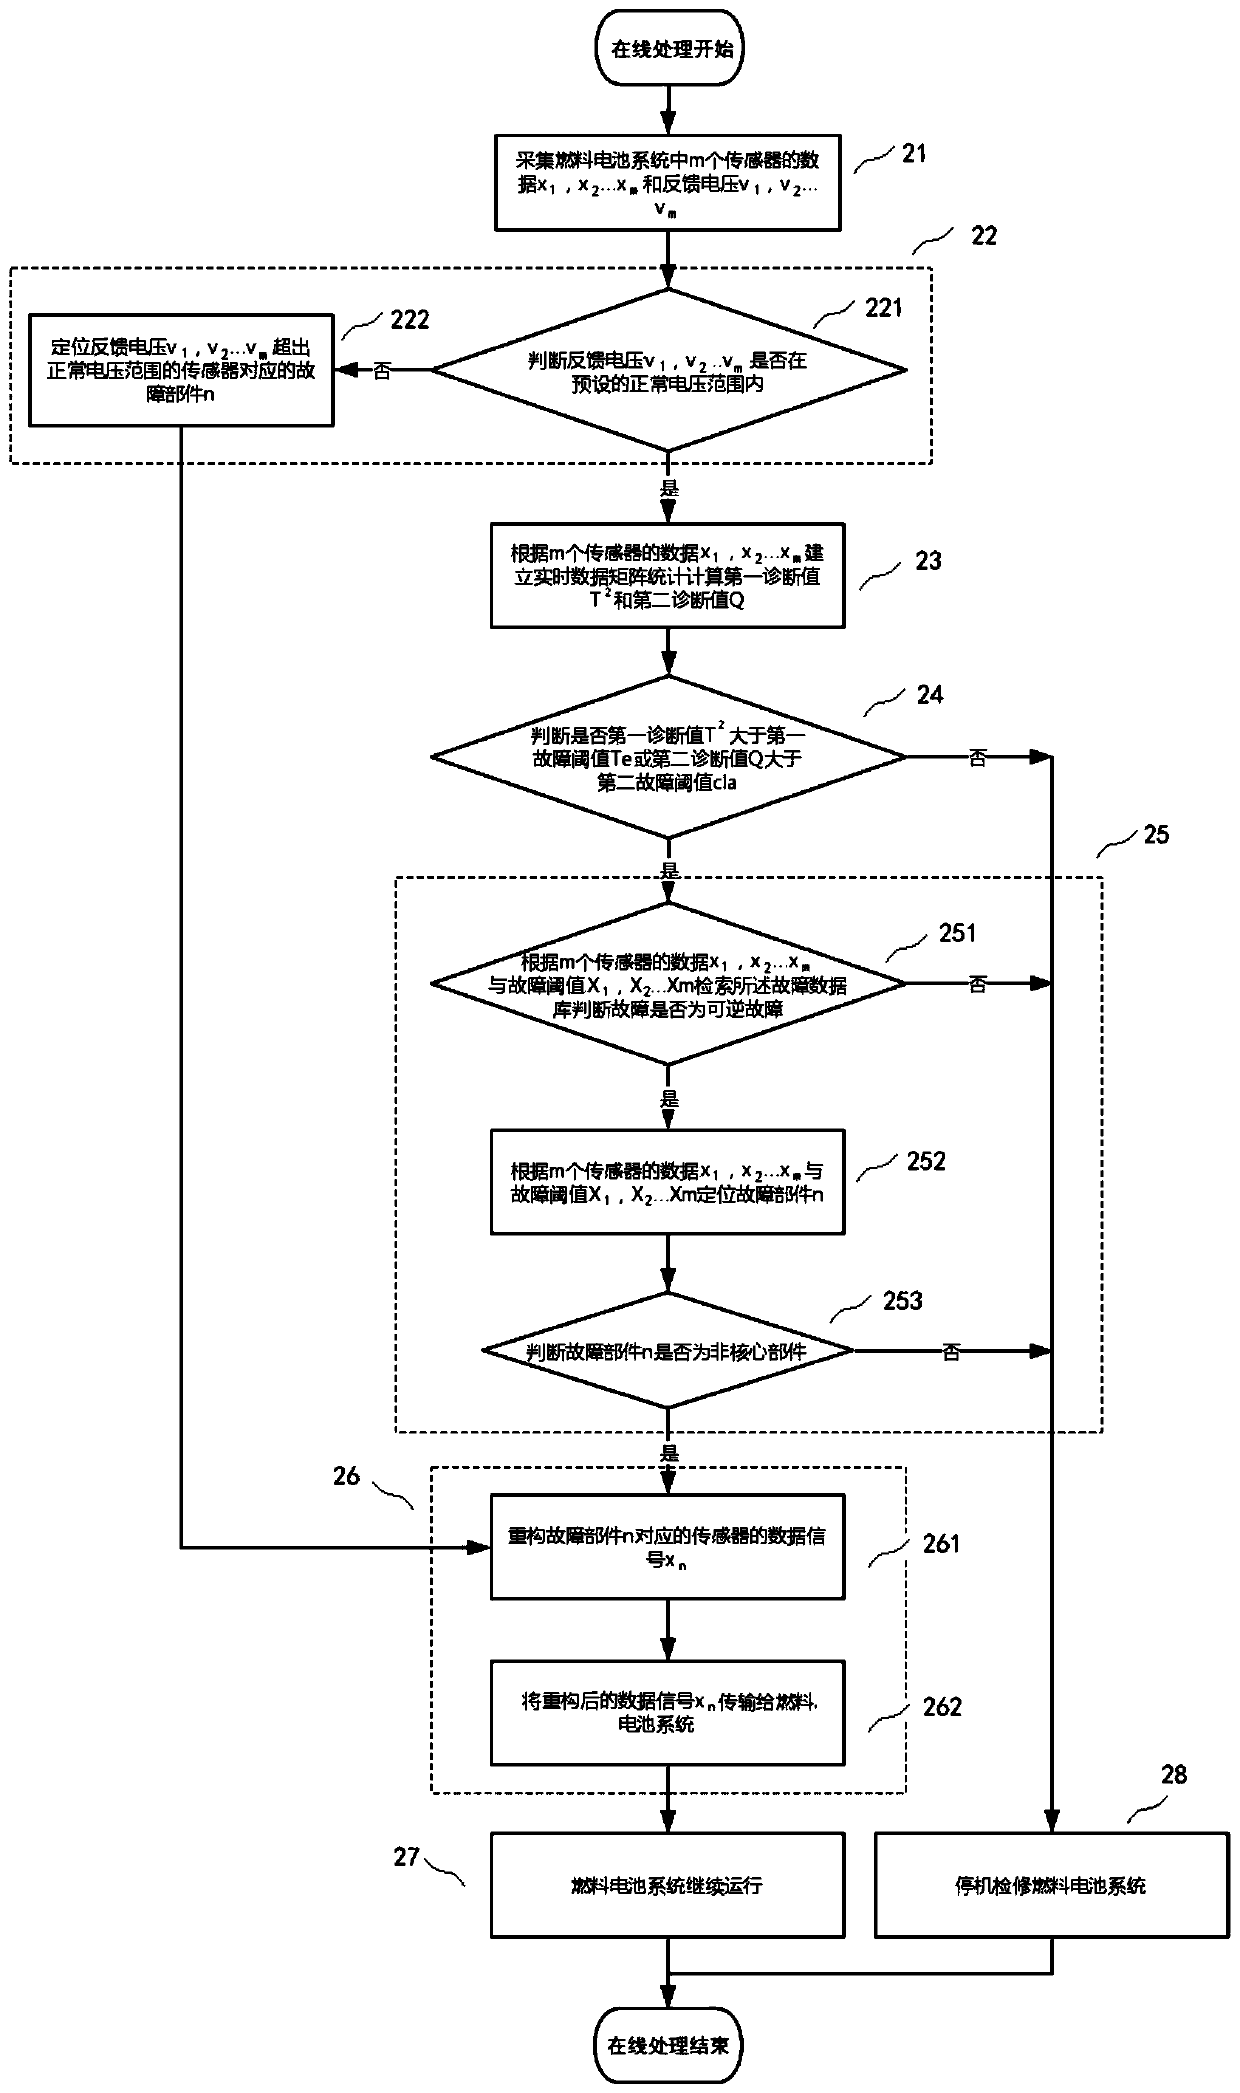 Fault diagnosis method for fuel cell system